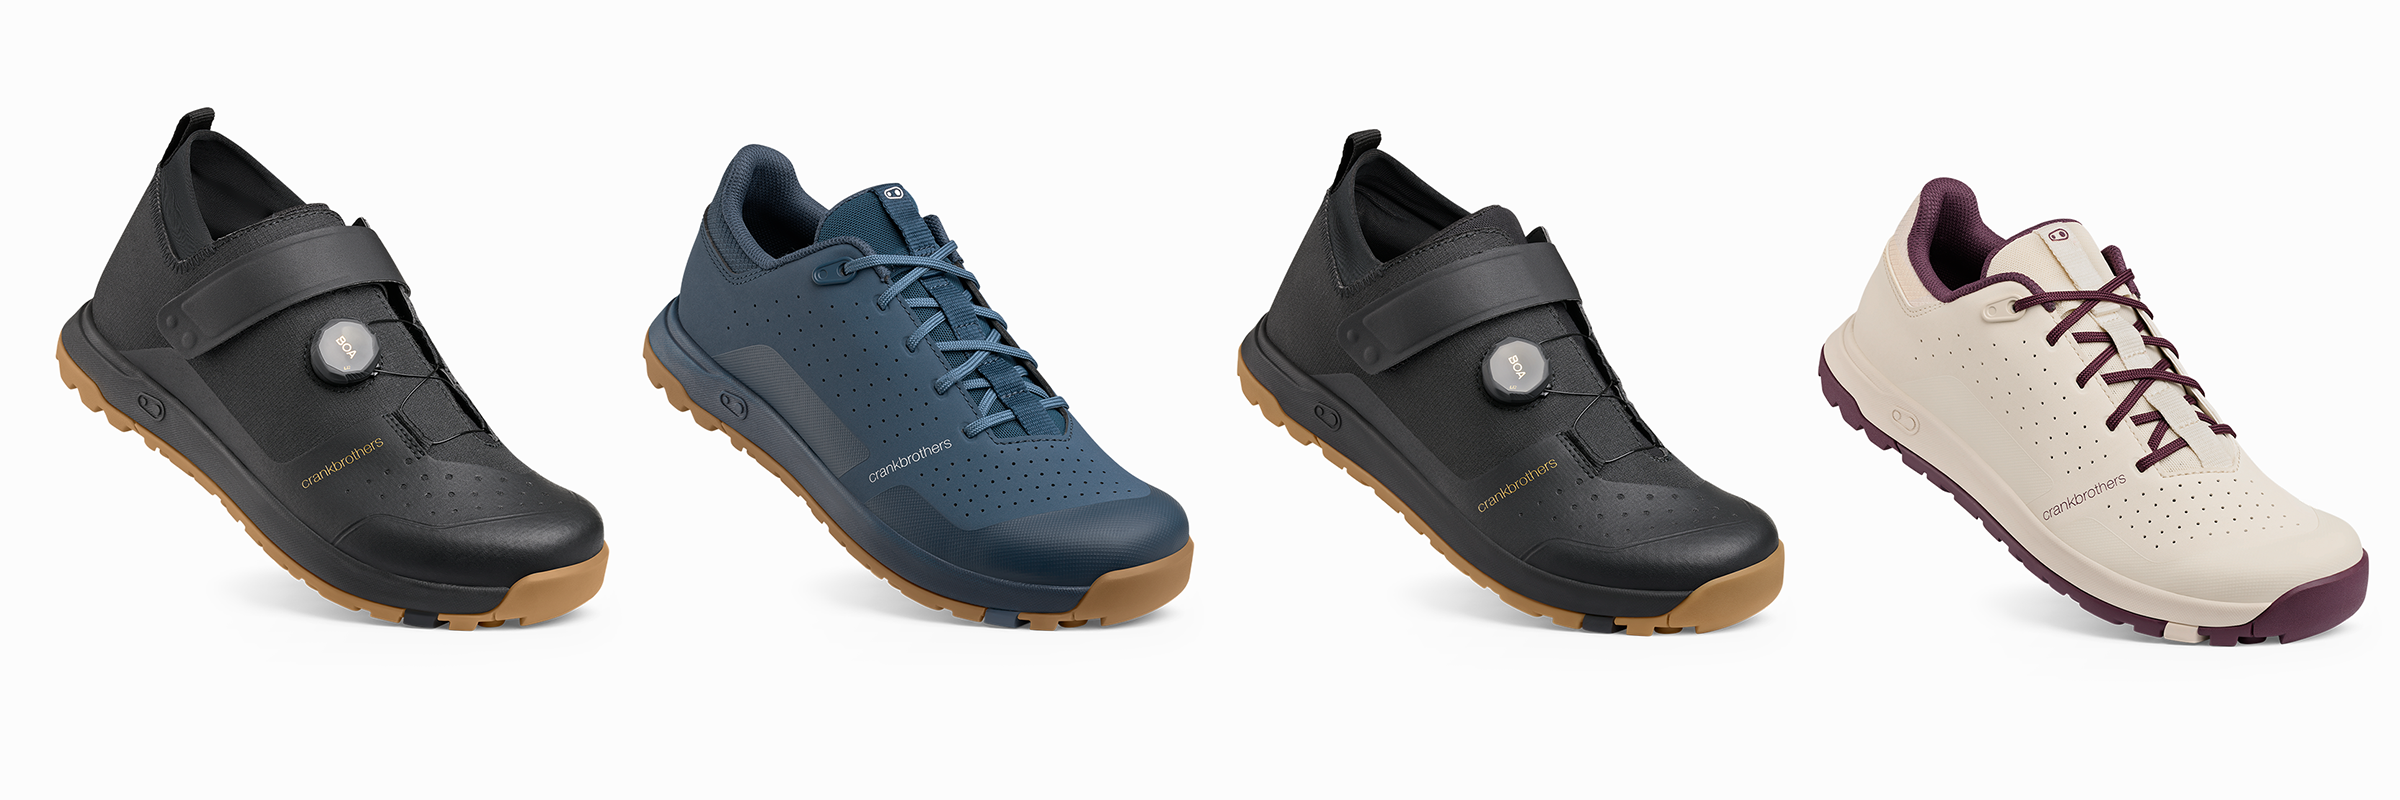 Crank Brothers Stamp & Mallet Trail Shoes